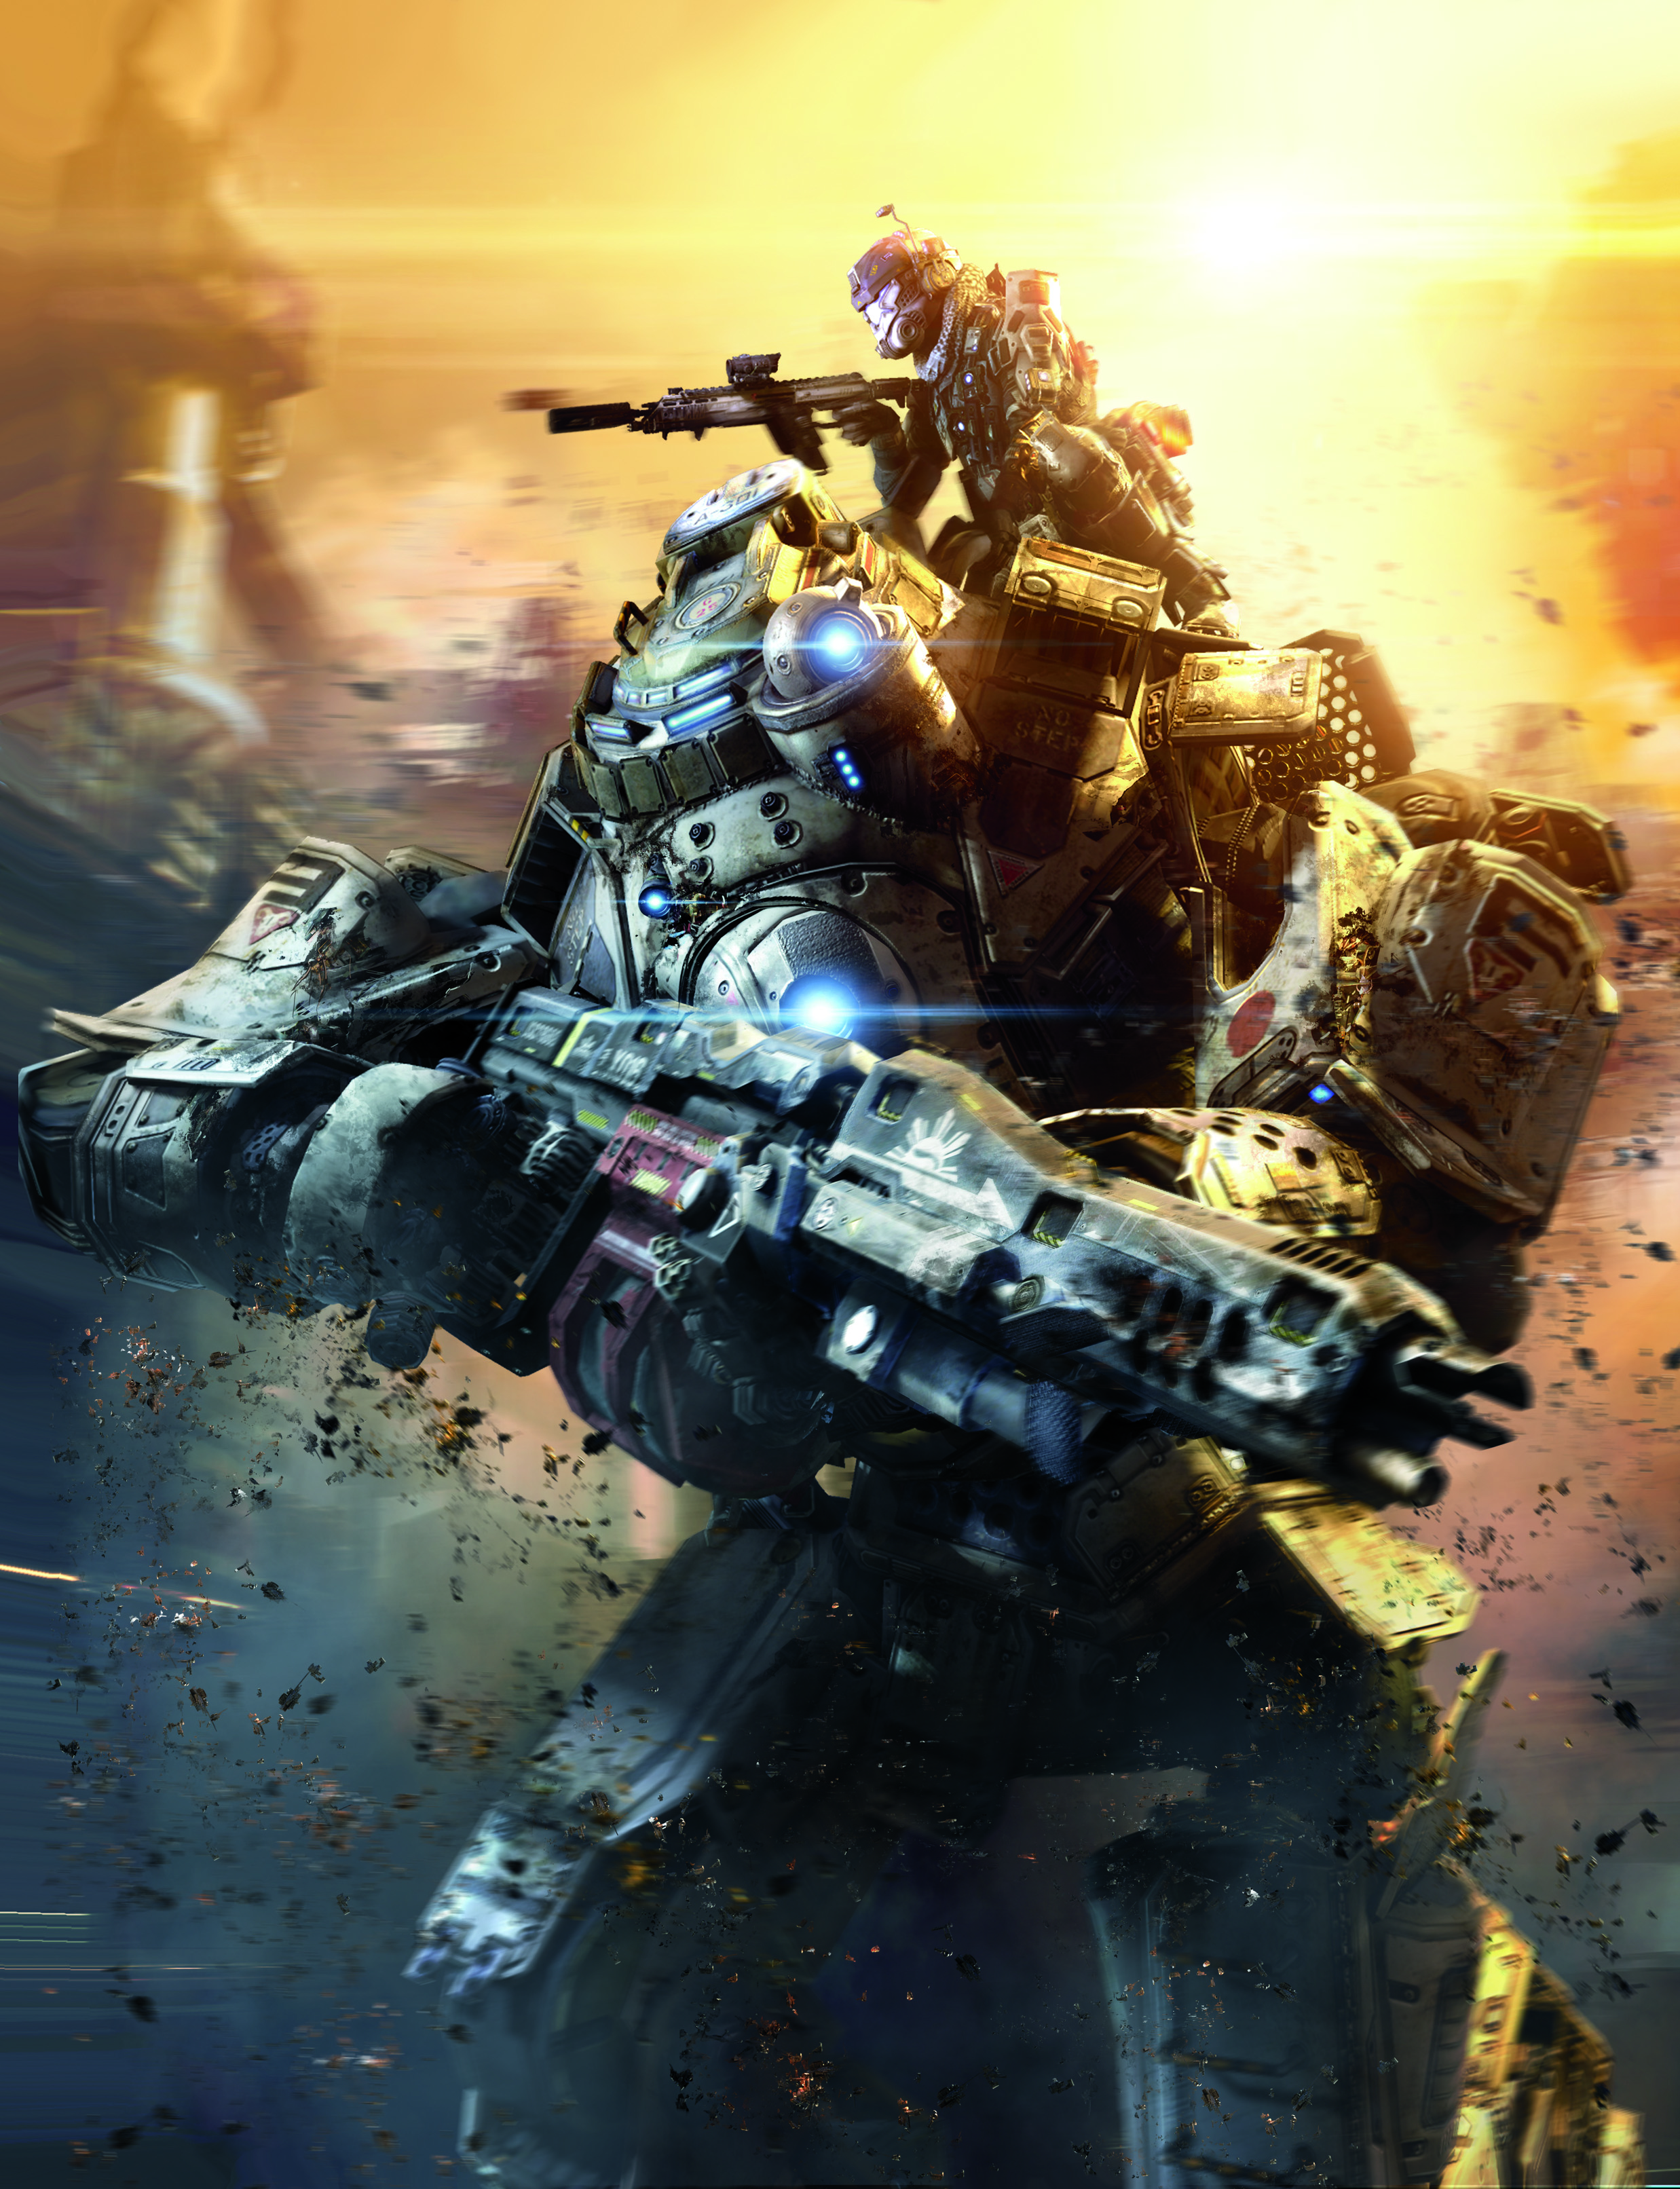 Titanfall 2 review: fast-paced robot shooter blasts its rivals, Games